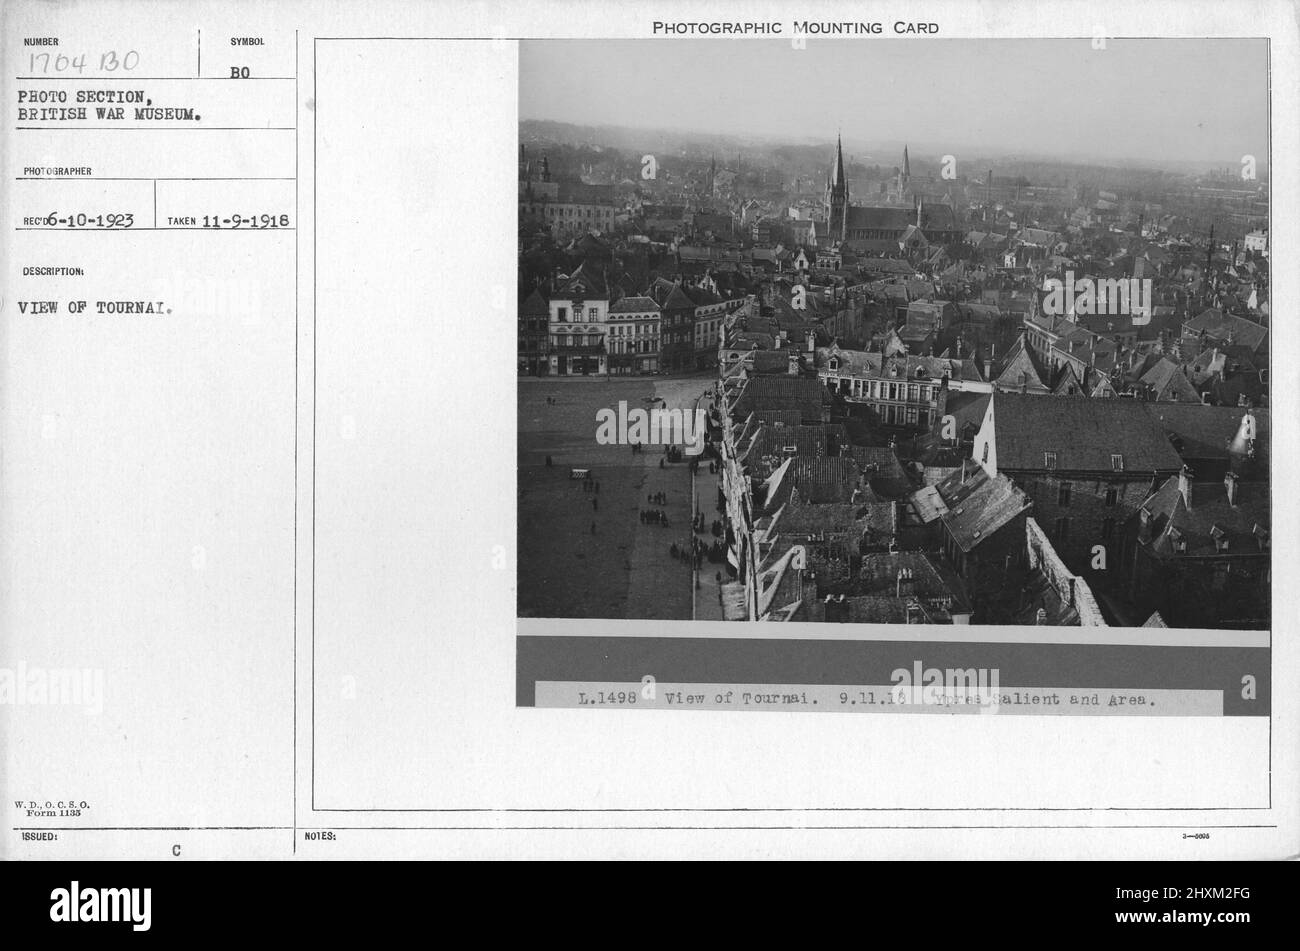 View of Tournai. Collection of World War I Photographs, 1914-1918 that depict the military activities of British and other nation's armed forces and personnel during World War I. Stock Photo